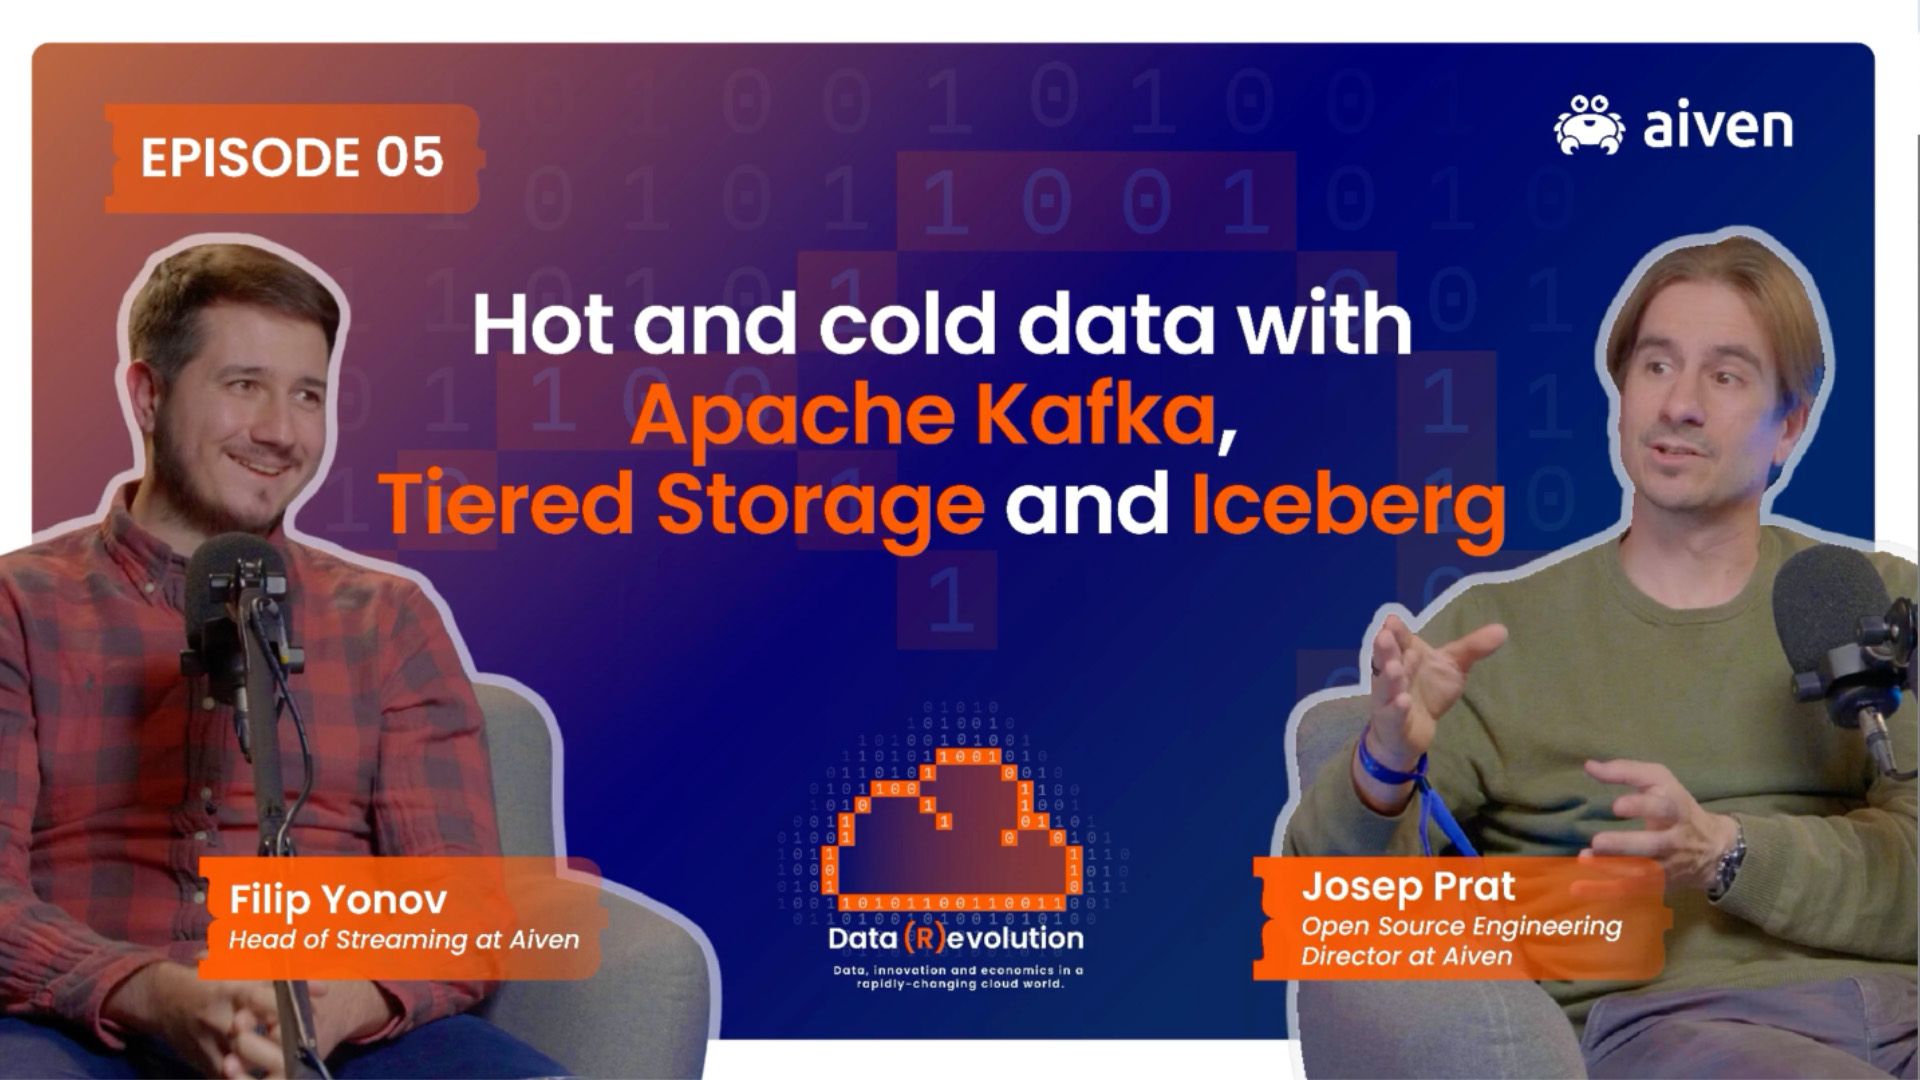 Hot and cold data with Apache Kafka, Tiered Storage, and Iceberg illustration